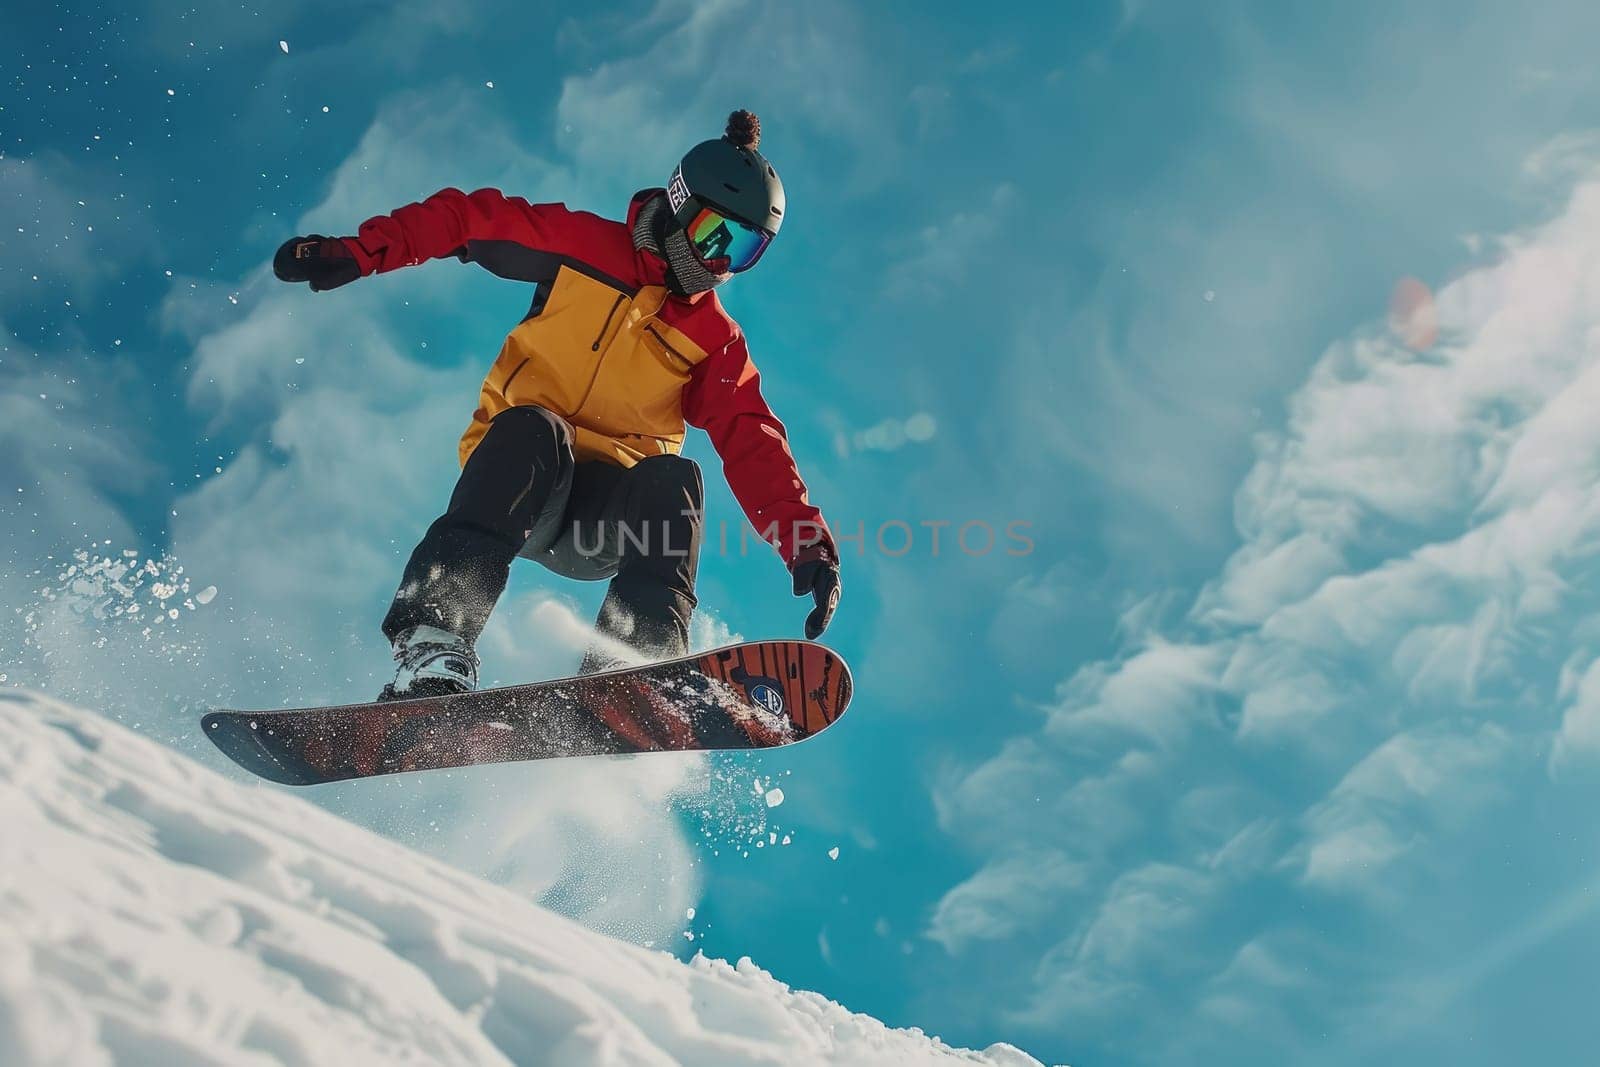 Snowboarding with a stock photo of a snowboarder executing a jump in a terrain park. by Chawagen